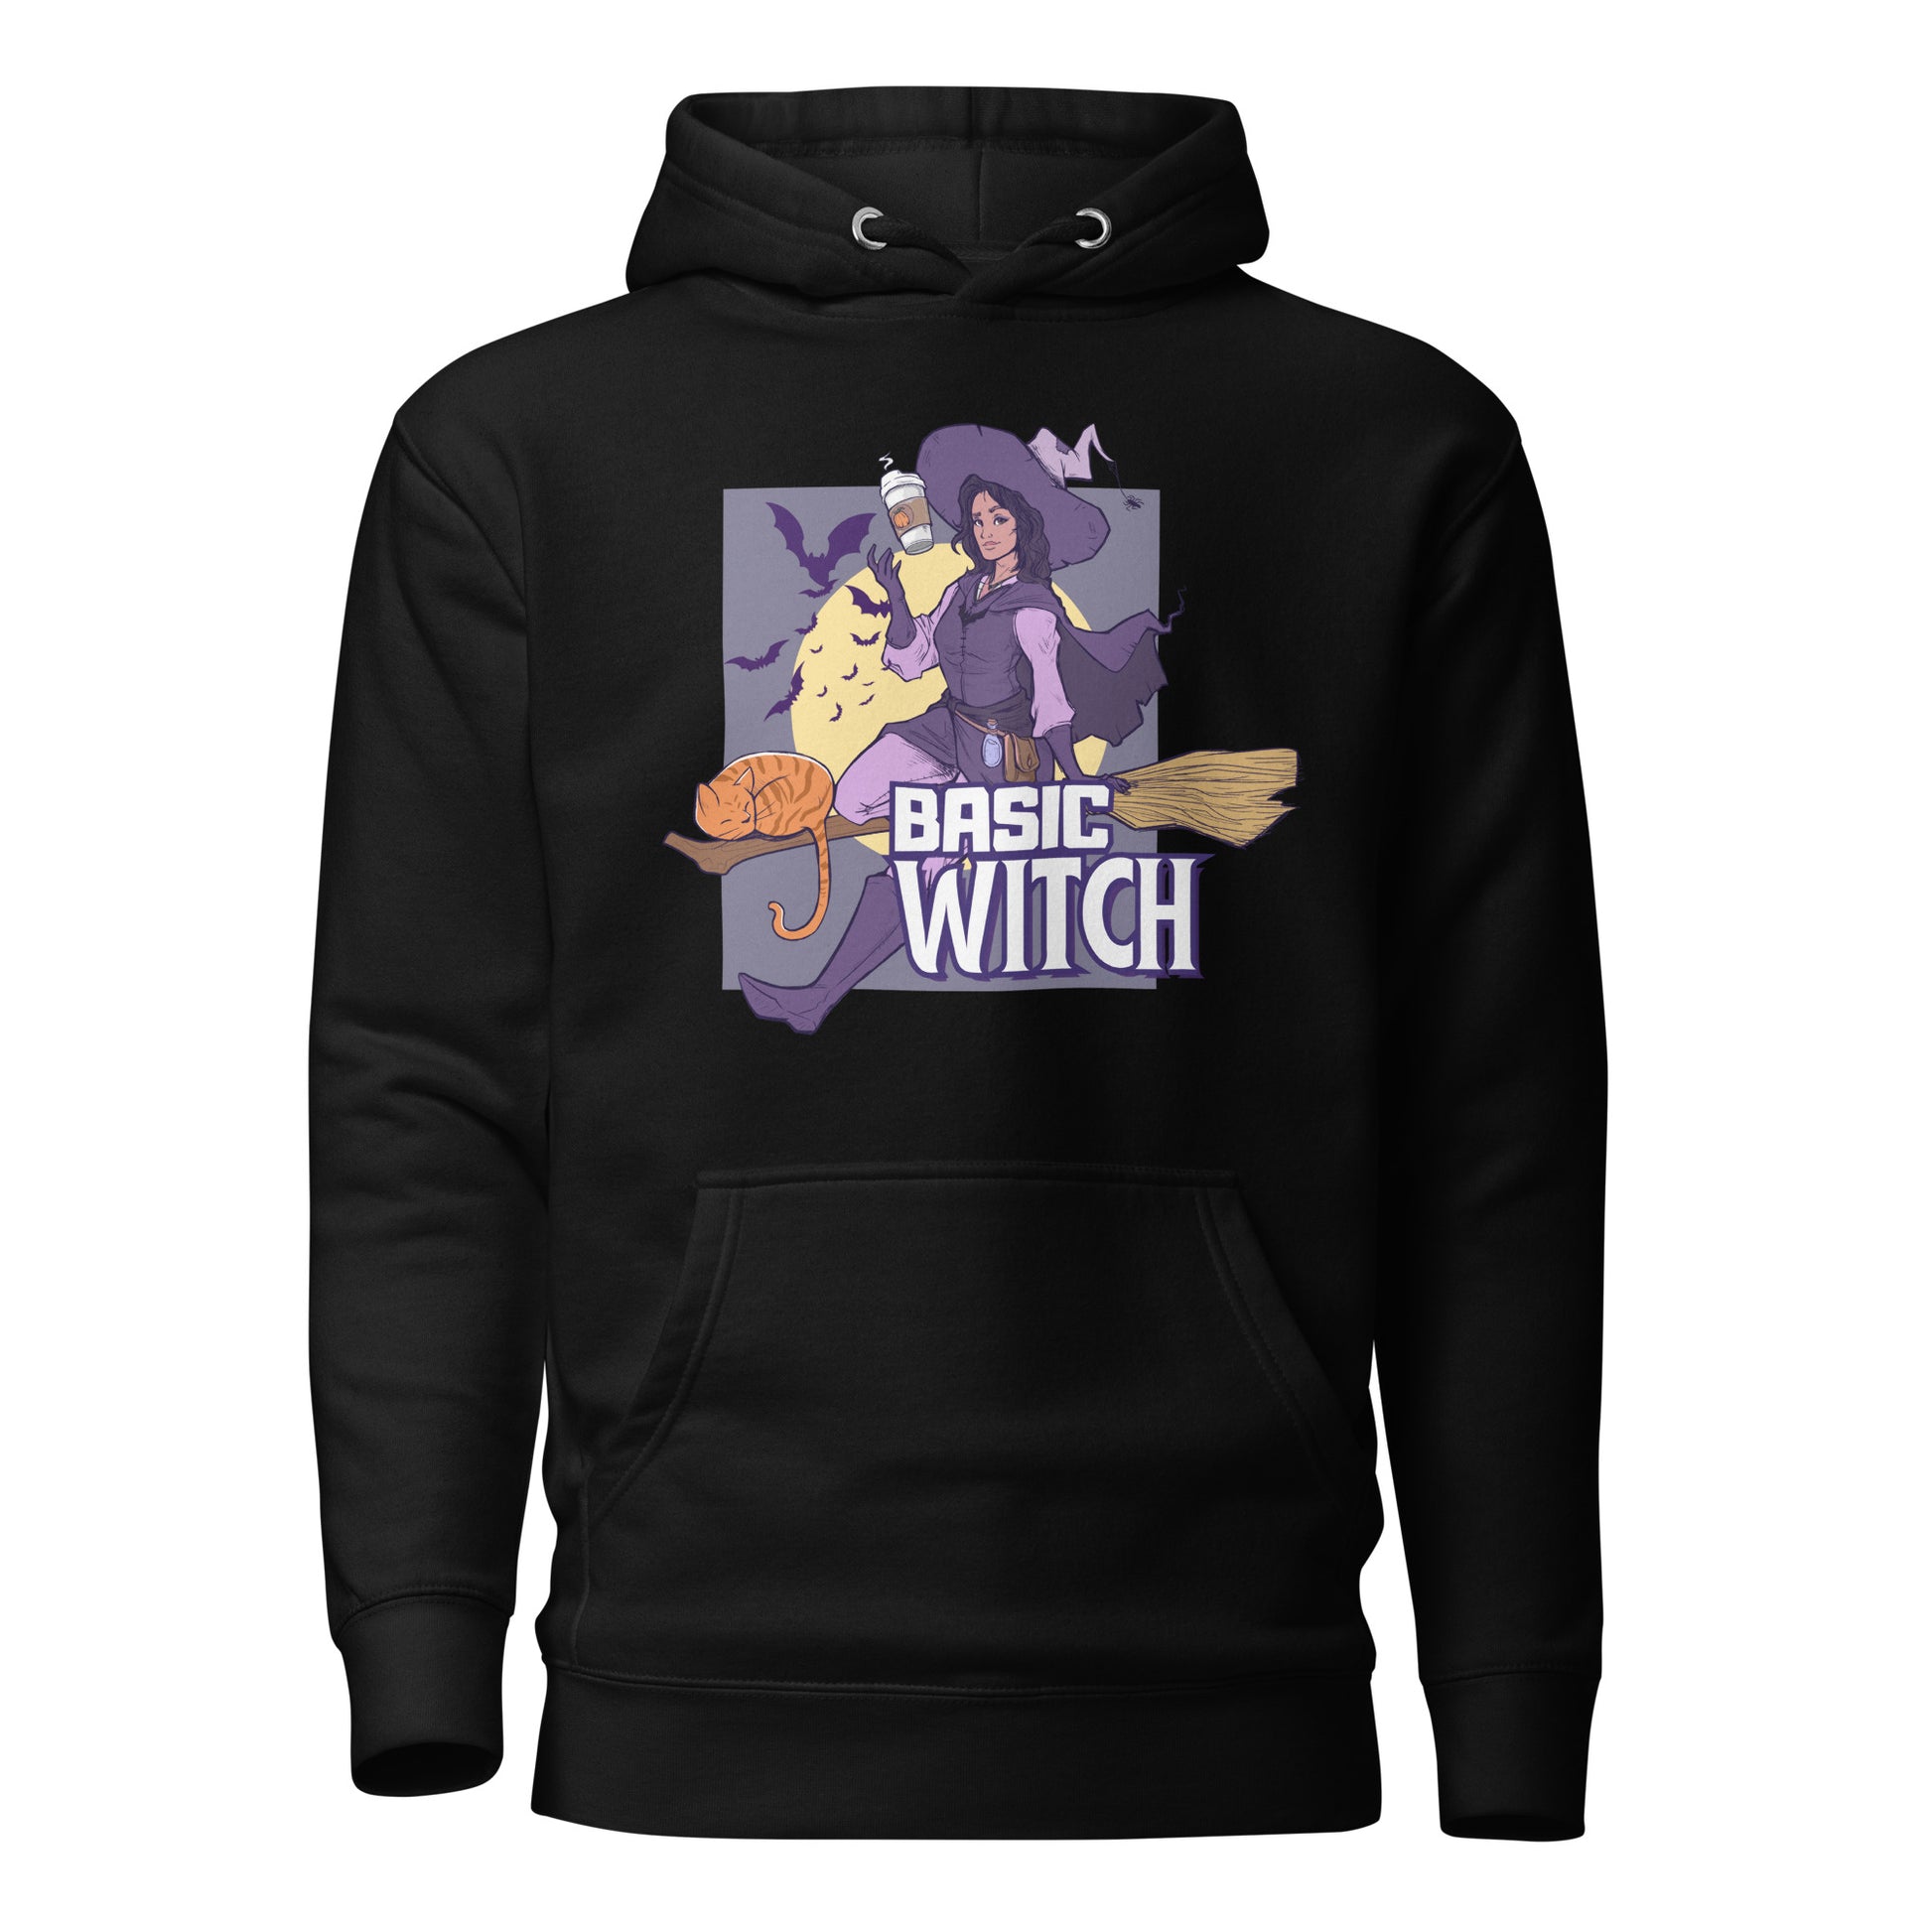 Basic Witch Unisex Hoodie  Level 1 Gamers Black S 